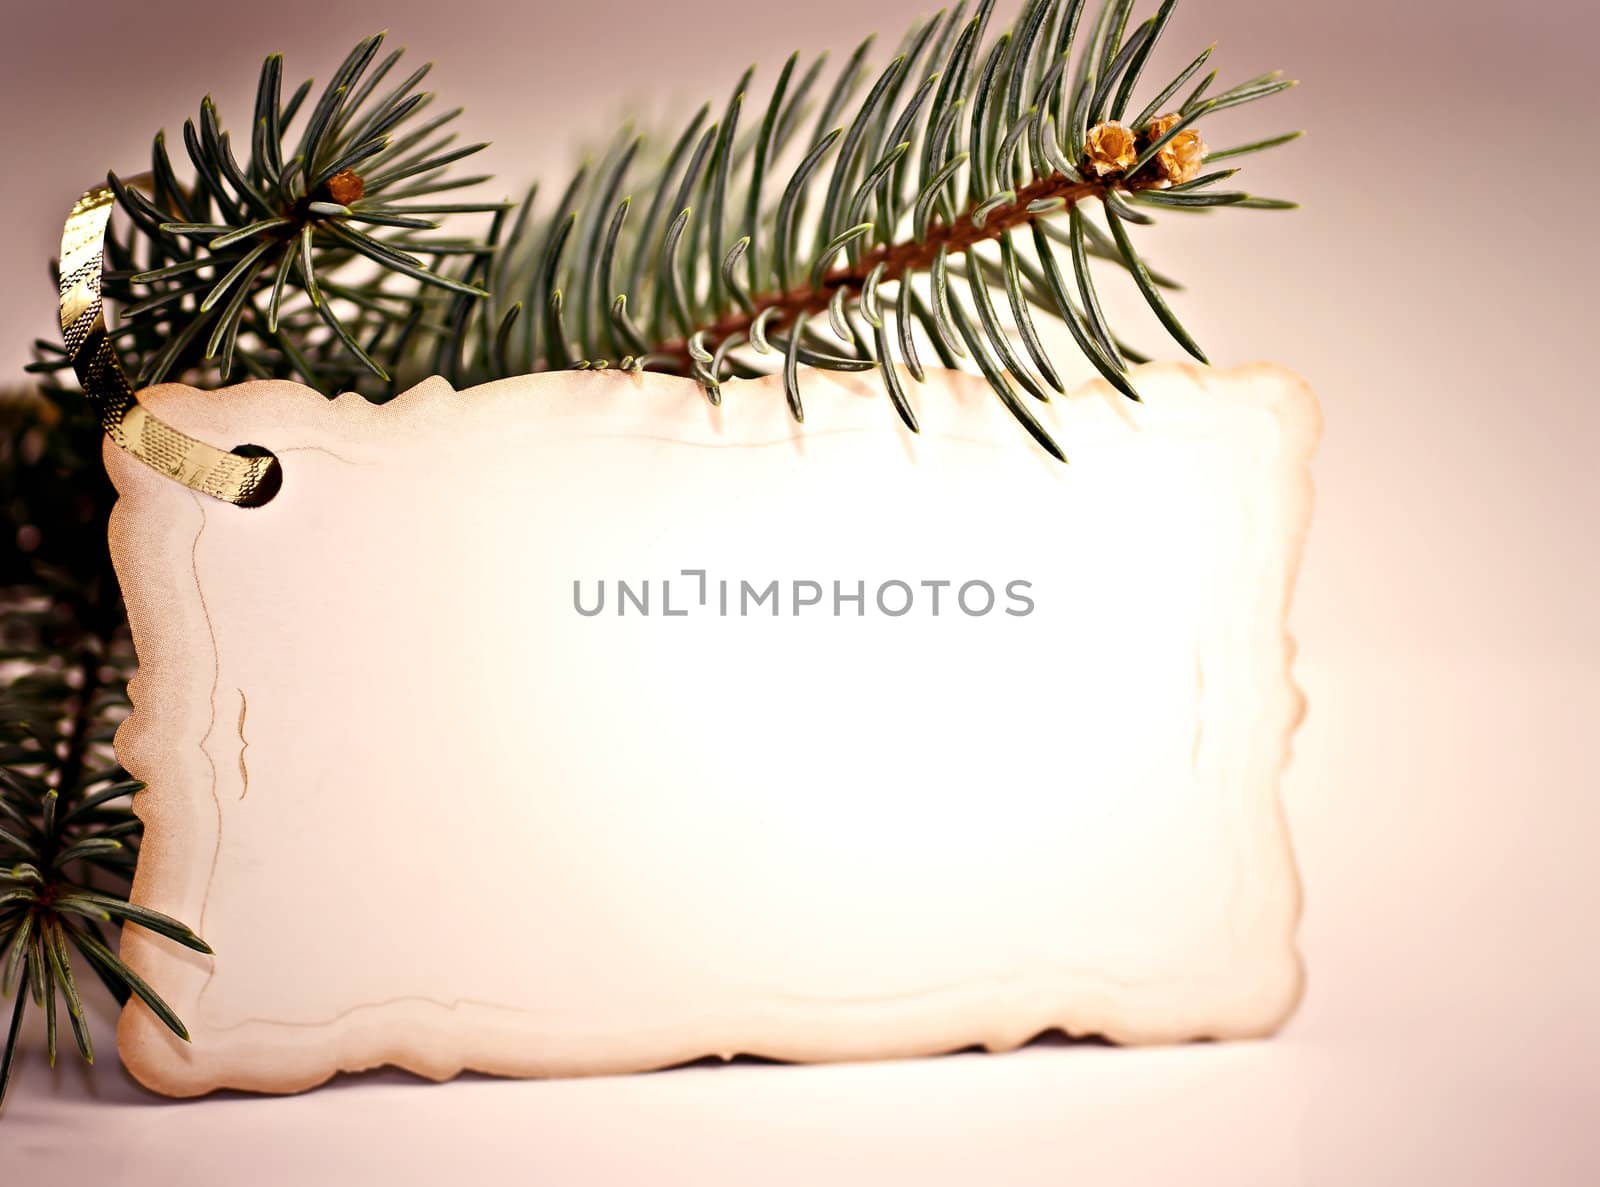 To spruce branch hanging Christmas greeting cards.
